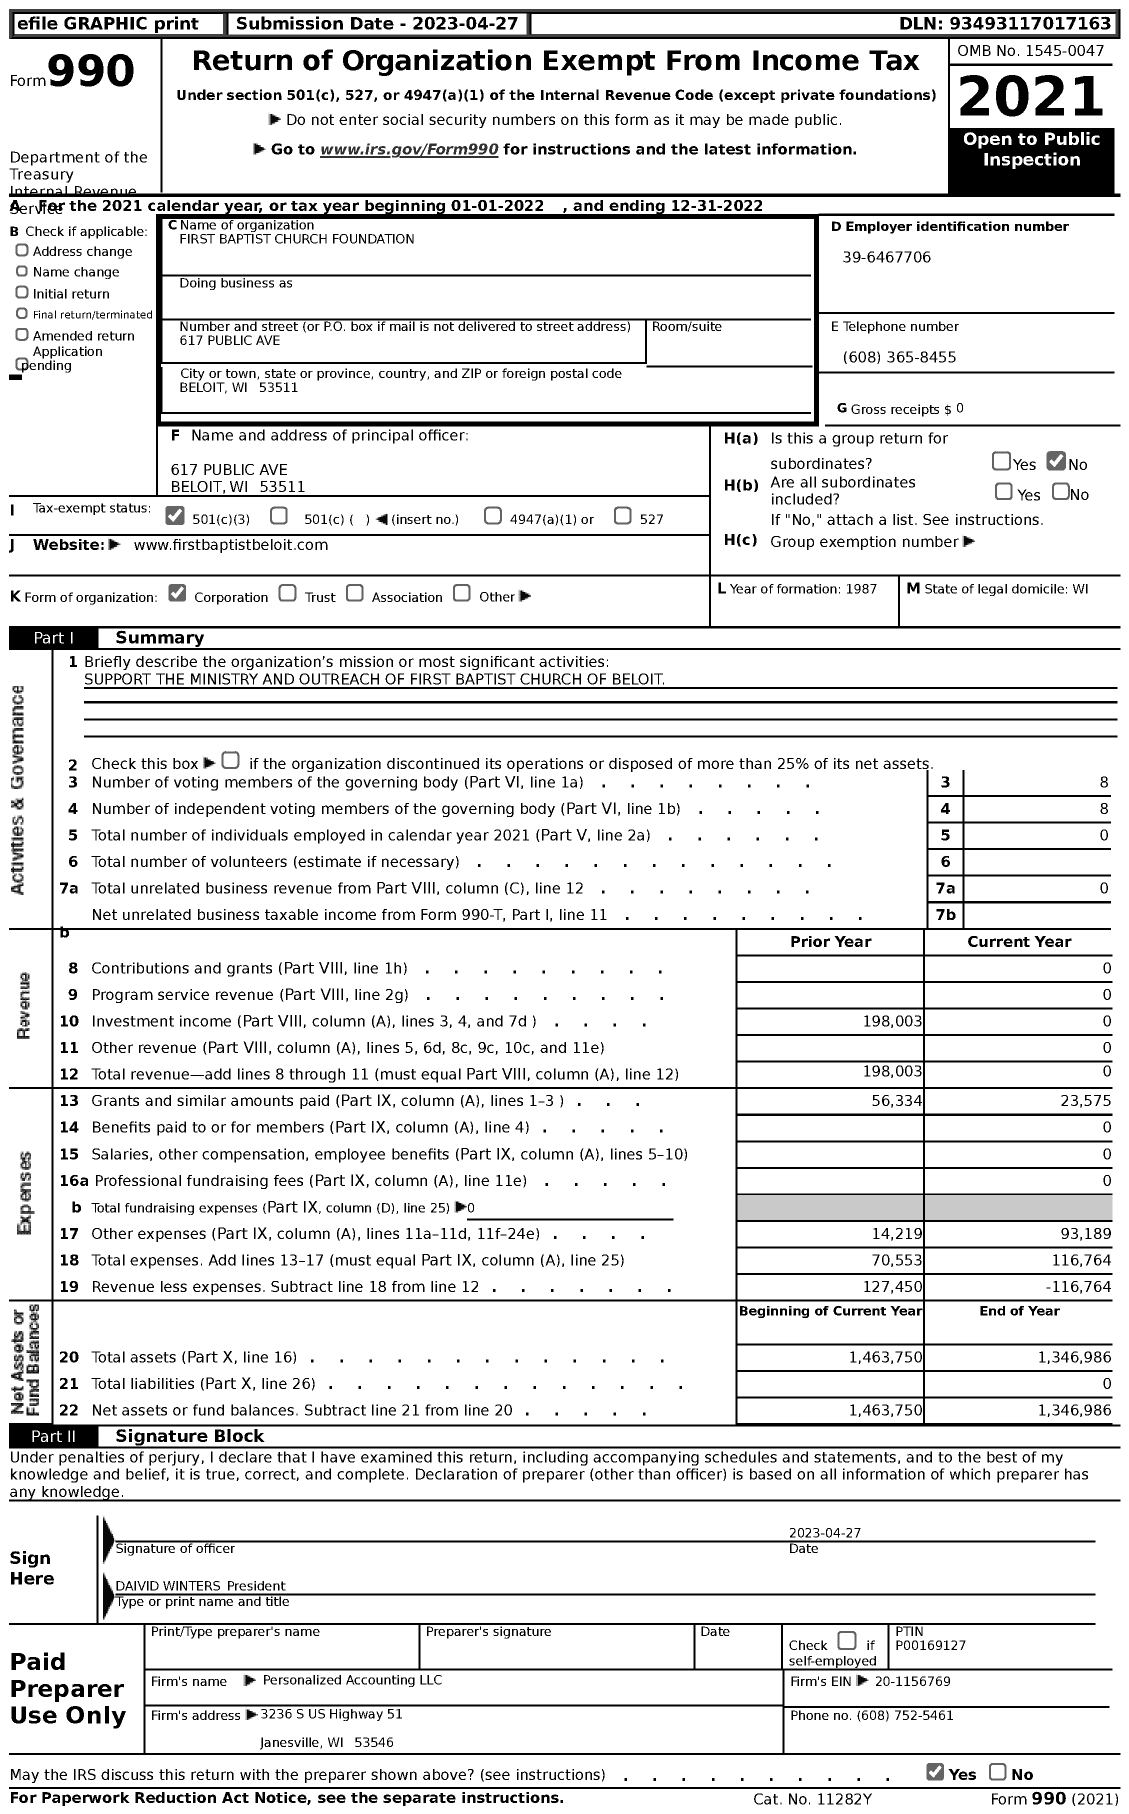 Image of first page of 2022 Form 990 for First Baptist Church Foundation